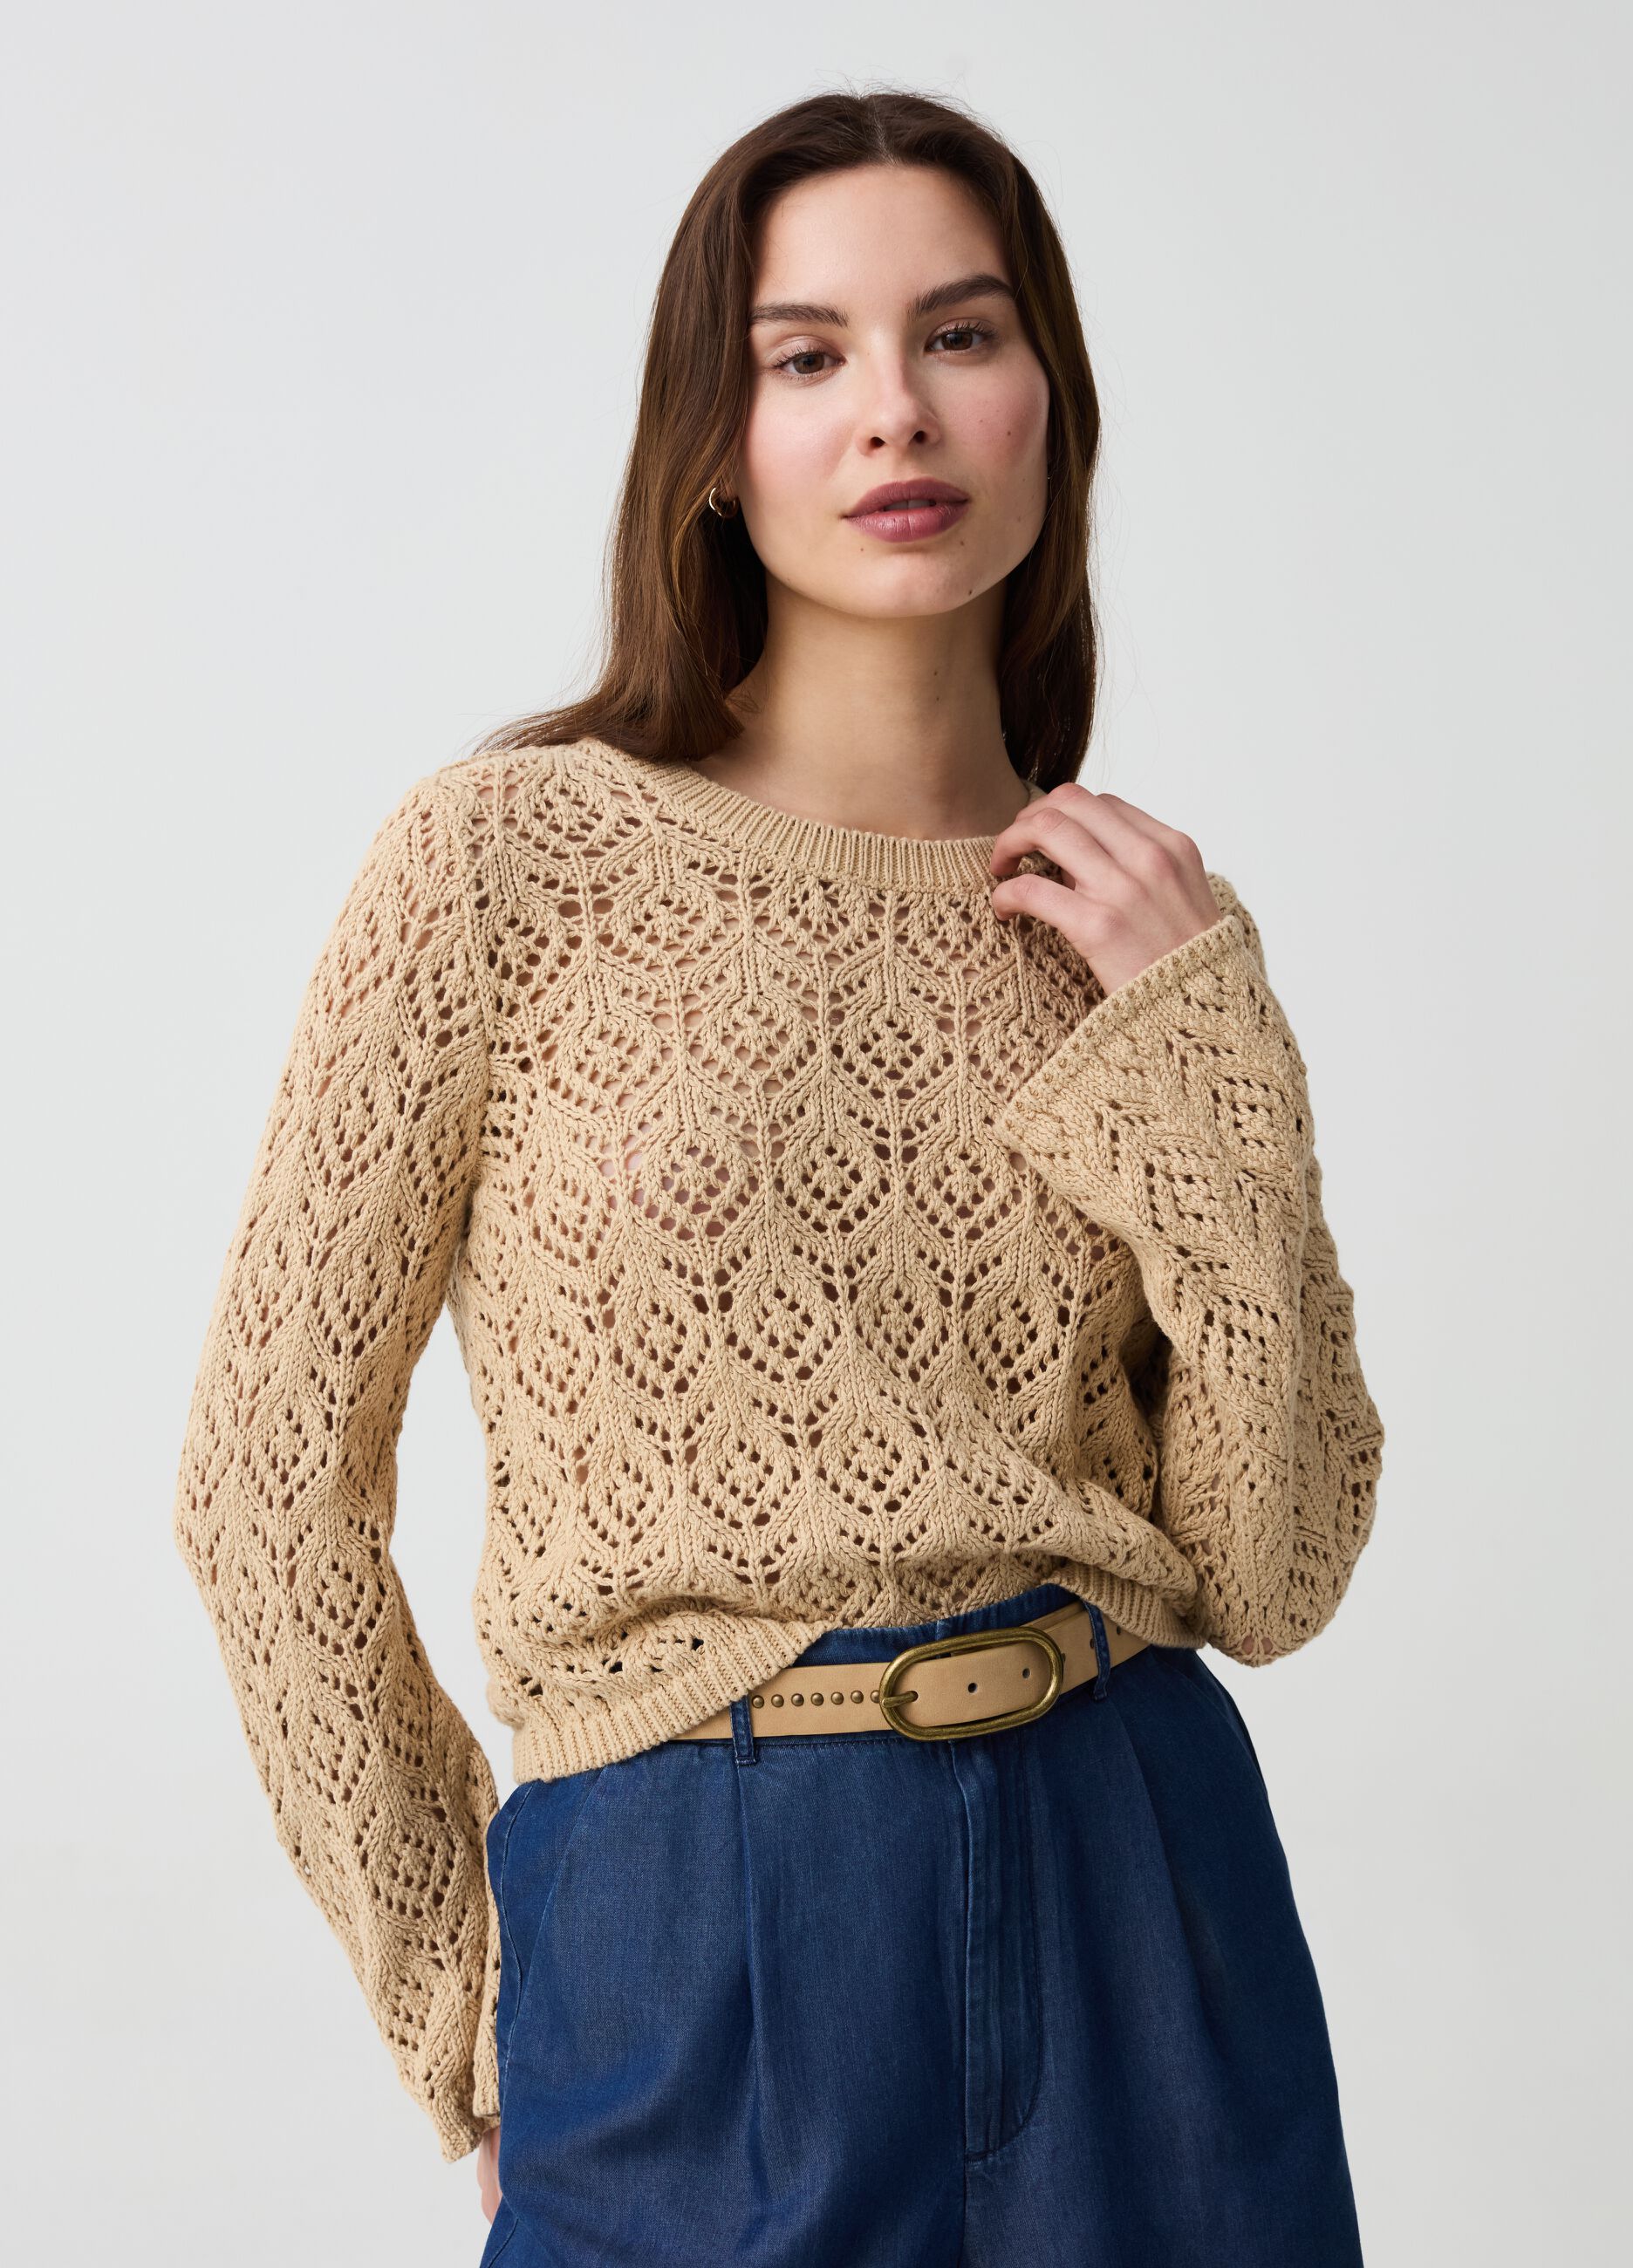 Crochet top with long sleeves